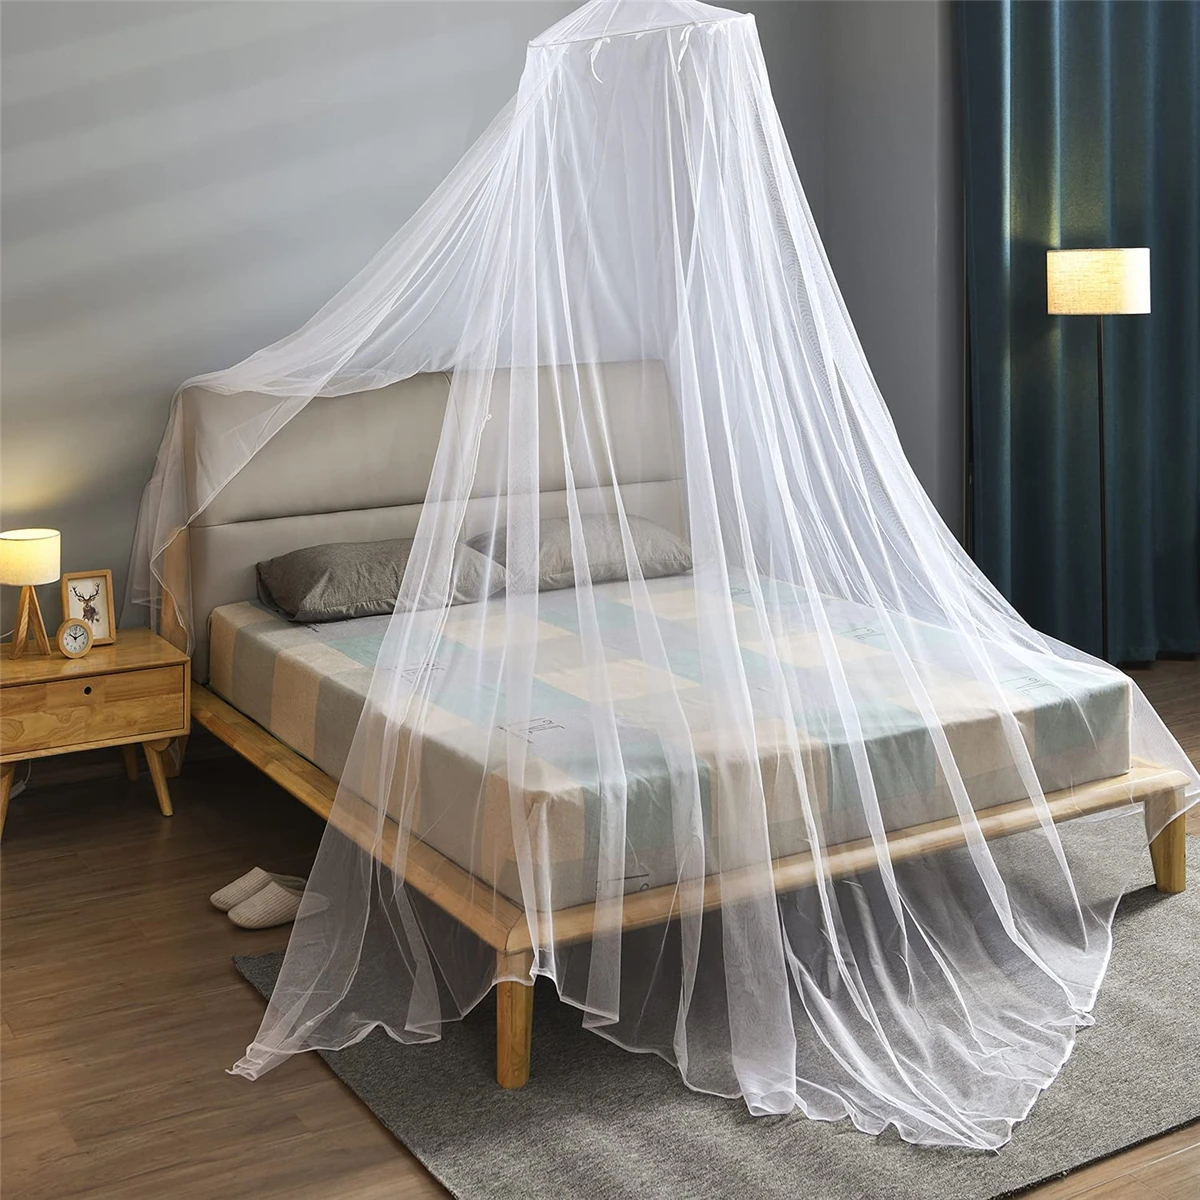 Bed Canopy Mosquito Net,Large Bed Hanging Curtains Netting f